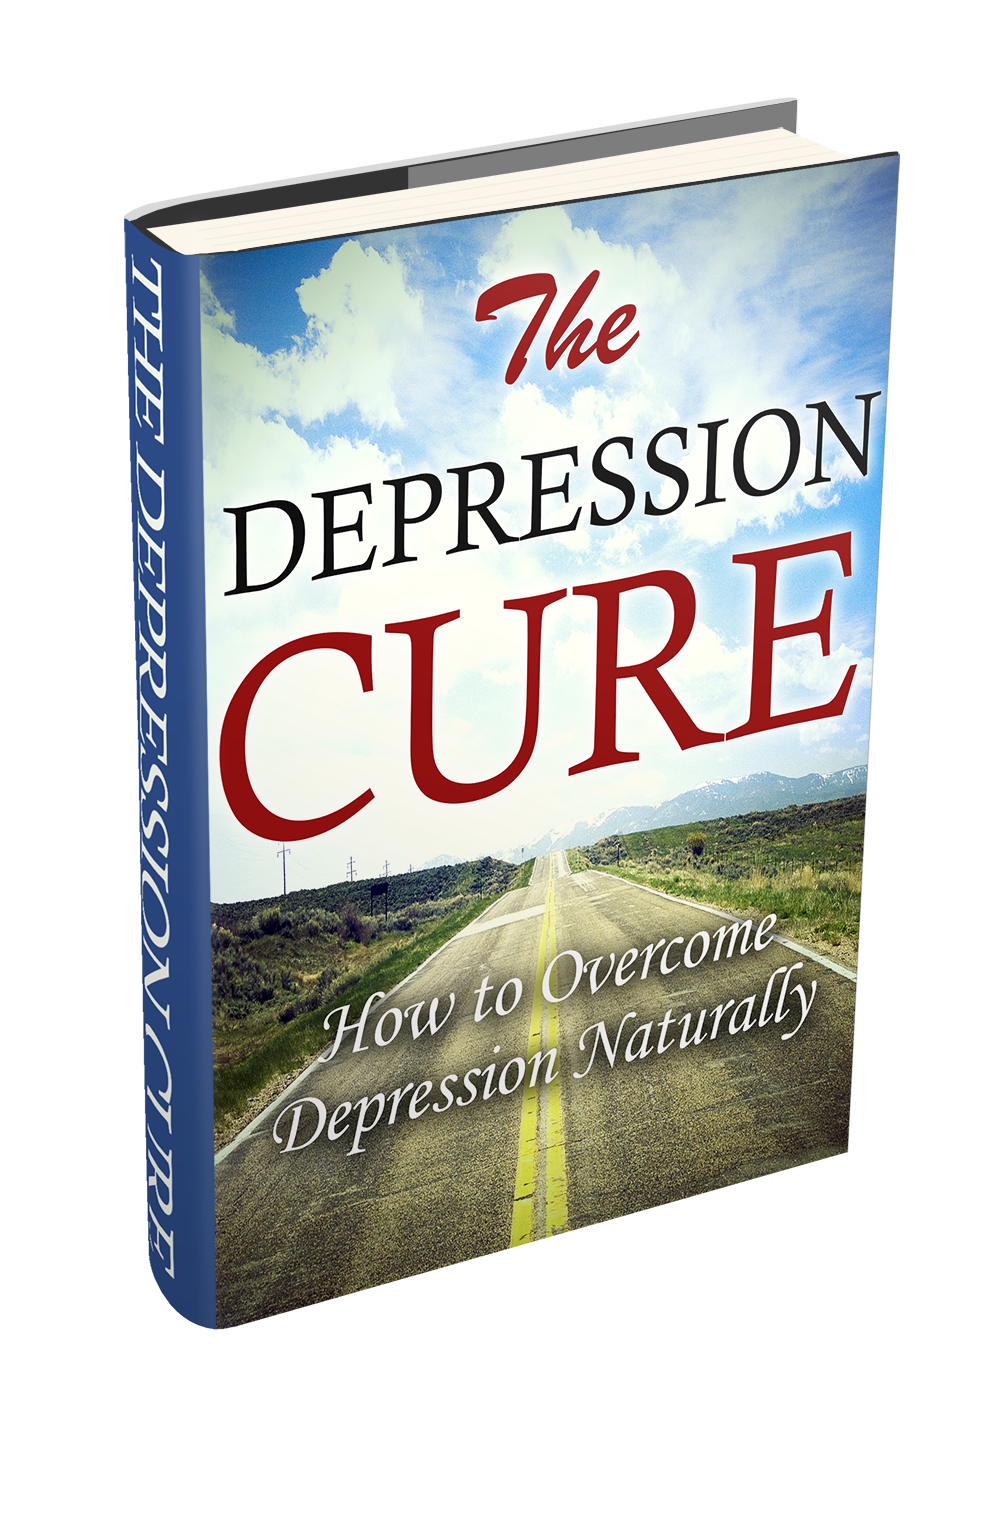 “The Depression Cure: How to Overcome Depression Naturally ” by BOB SMITH